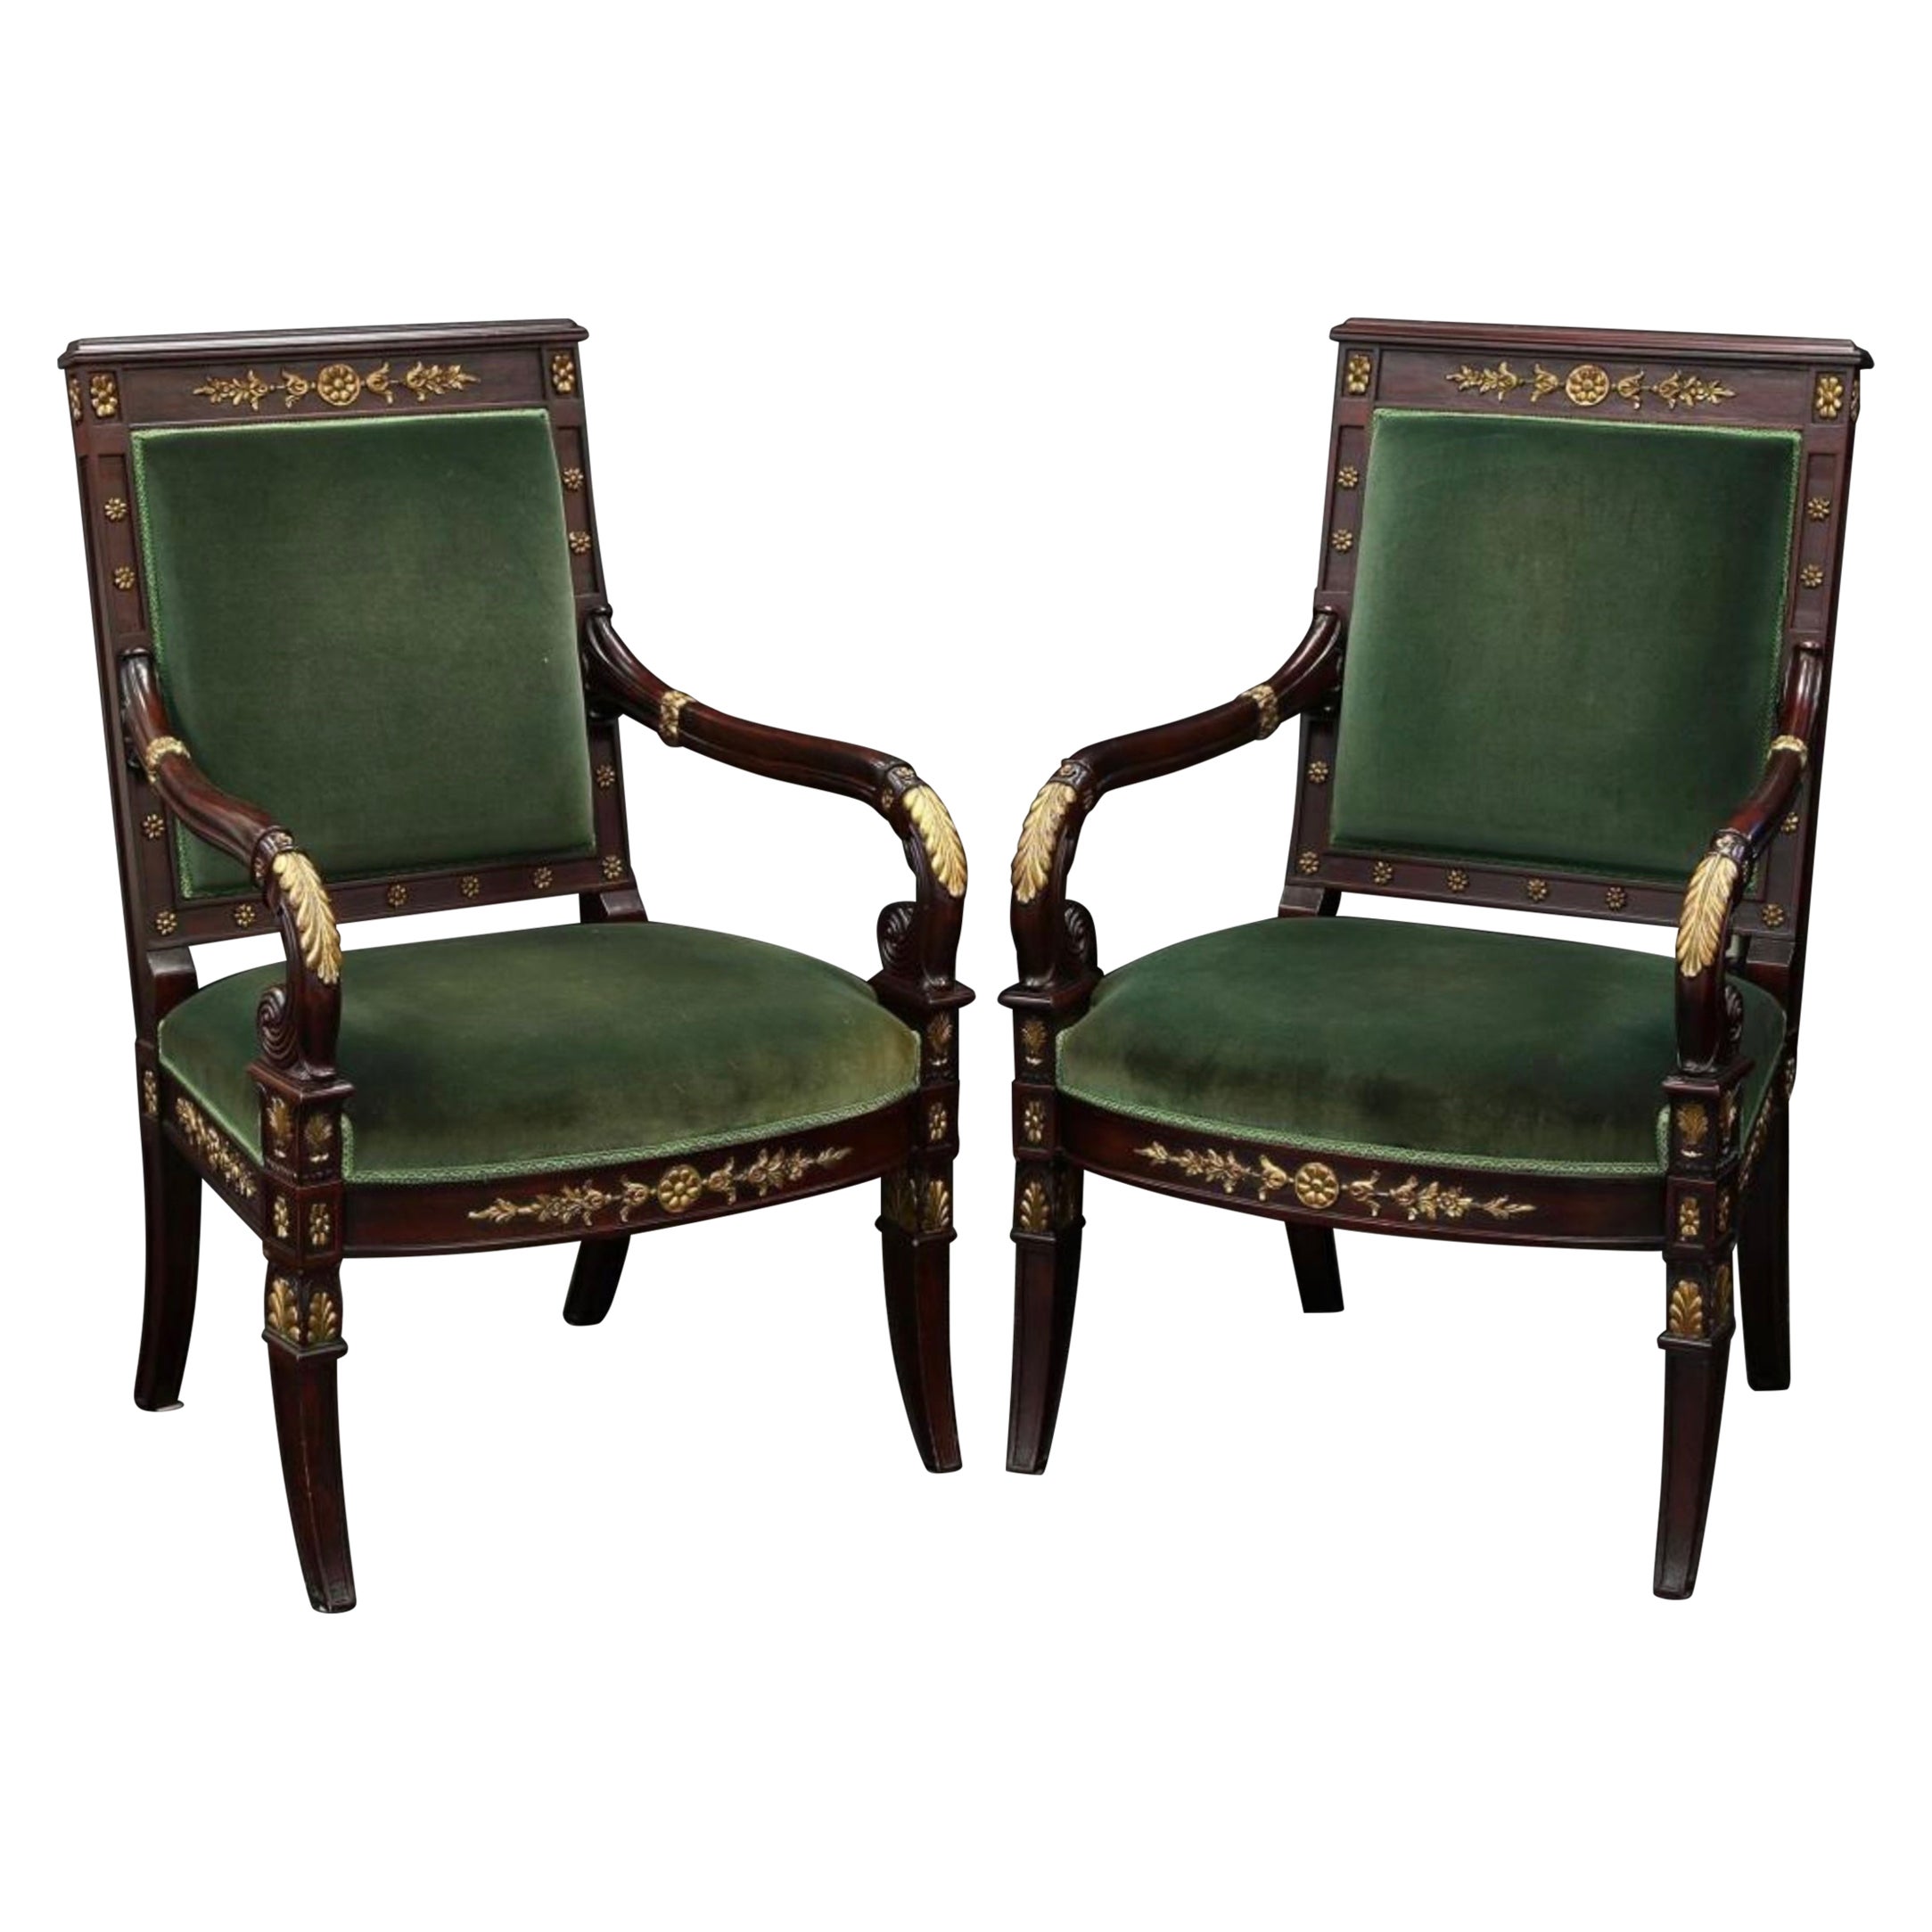 20th-C. Fruitwood and Giltwood Italian Bergere Chairs in Green Velvet, Pair For Sale